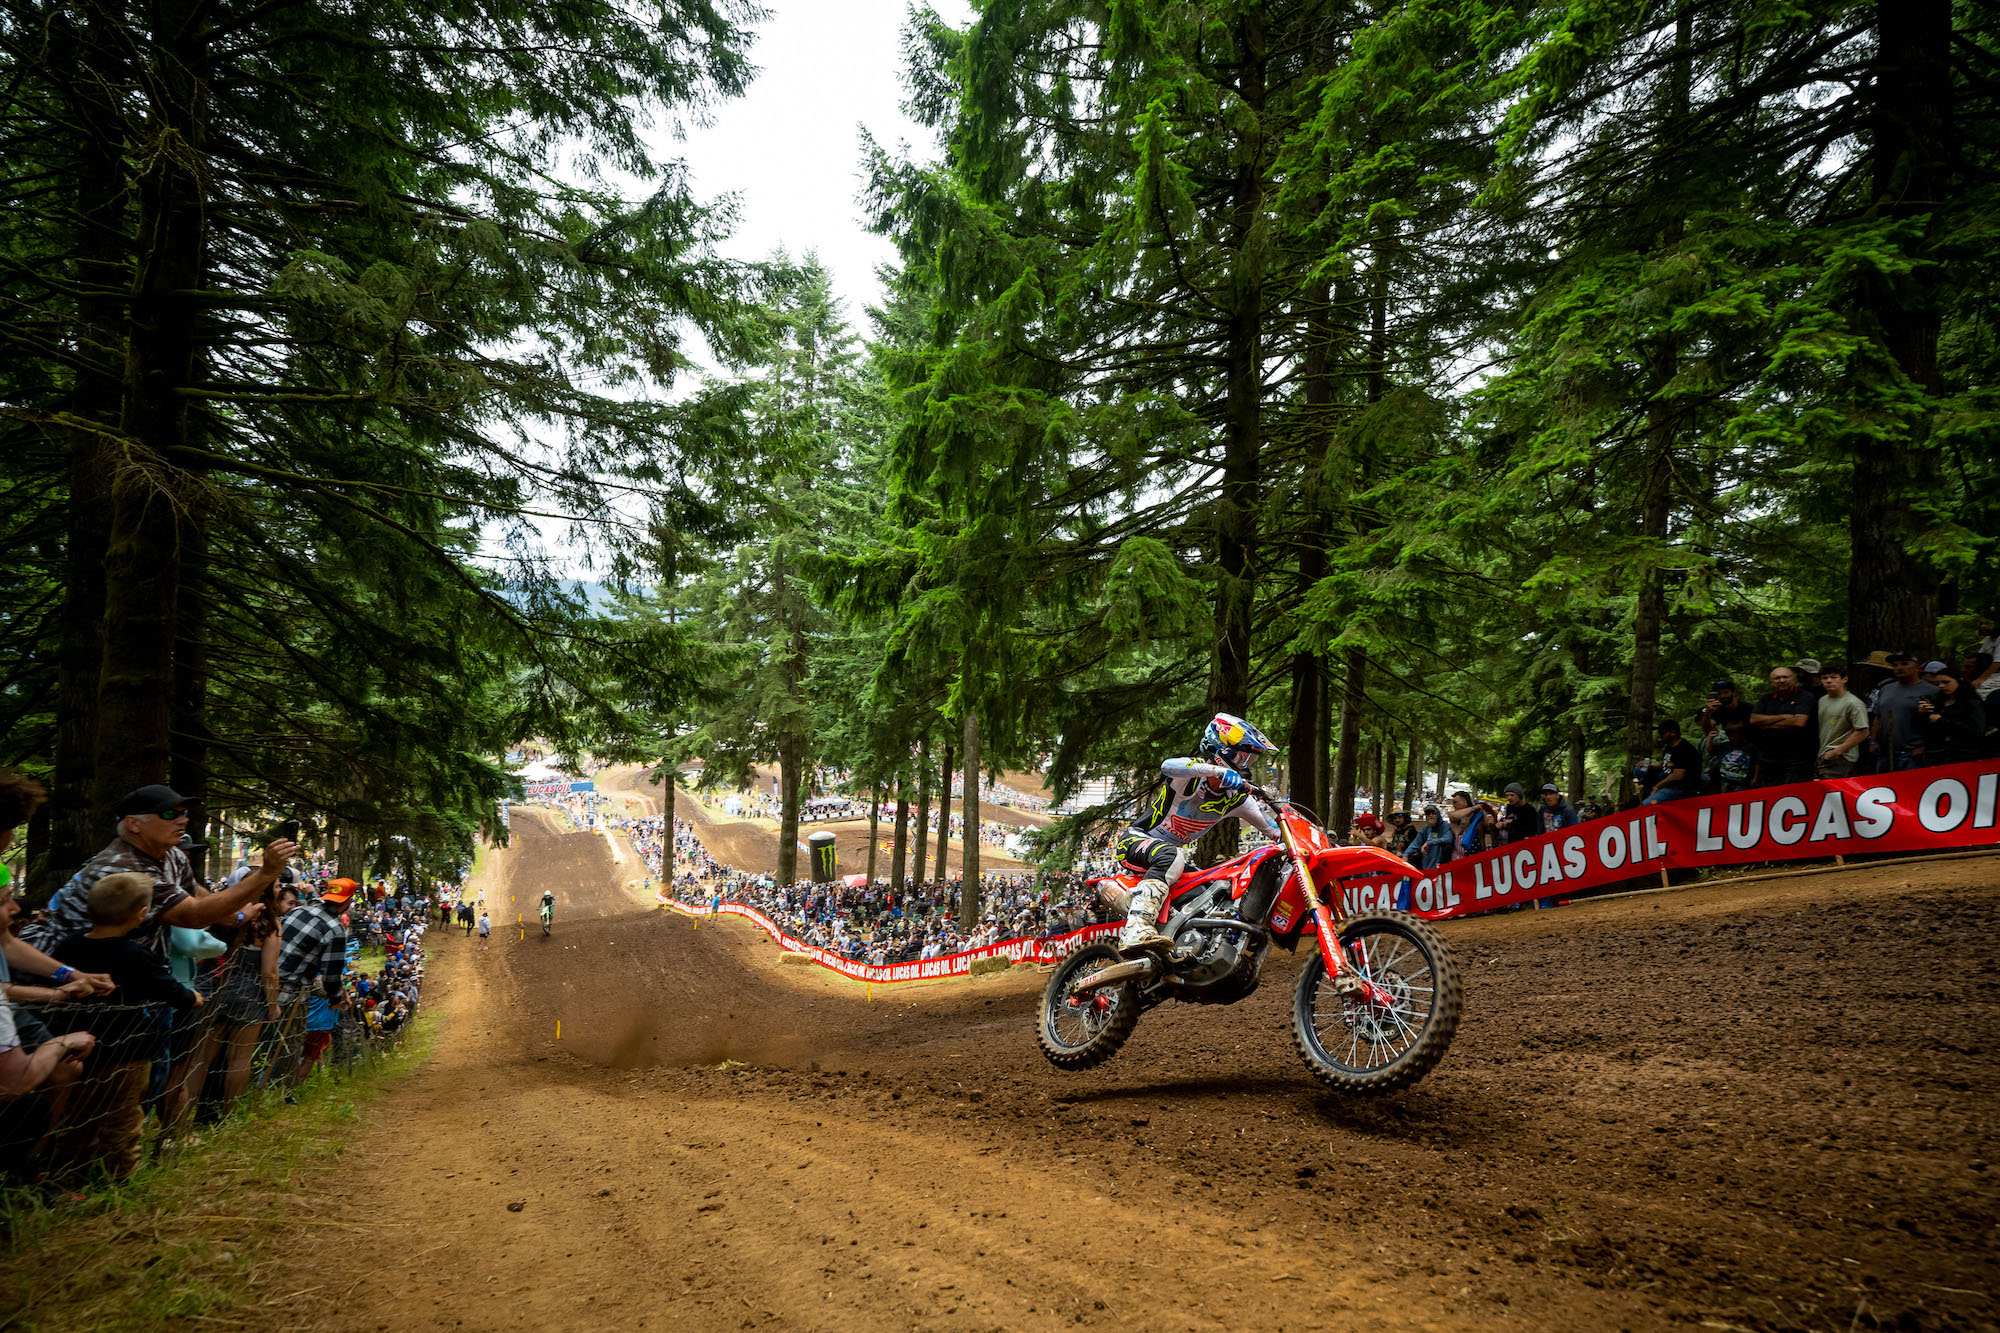 Motocross fans flock to Clark County for Washougal National